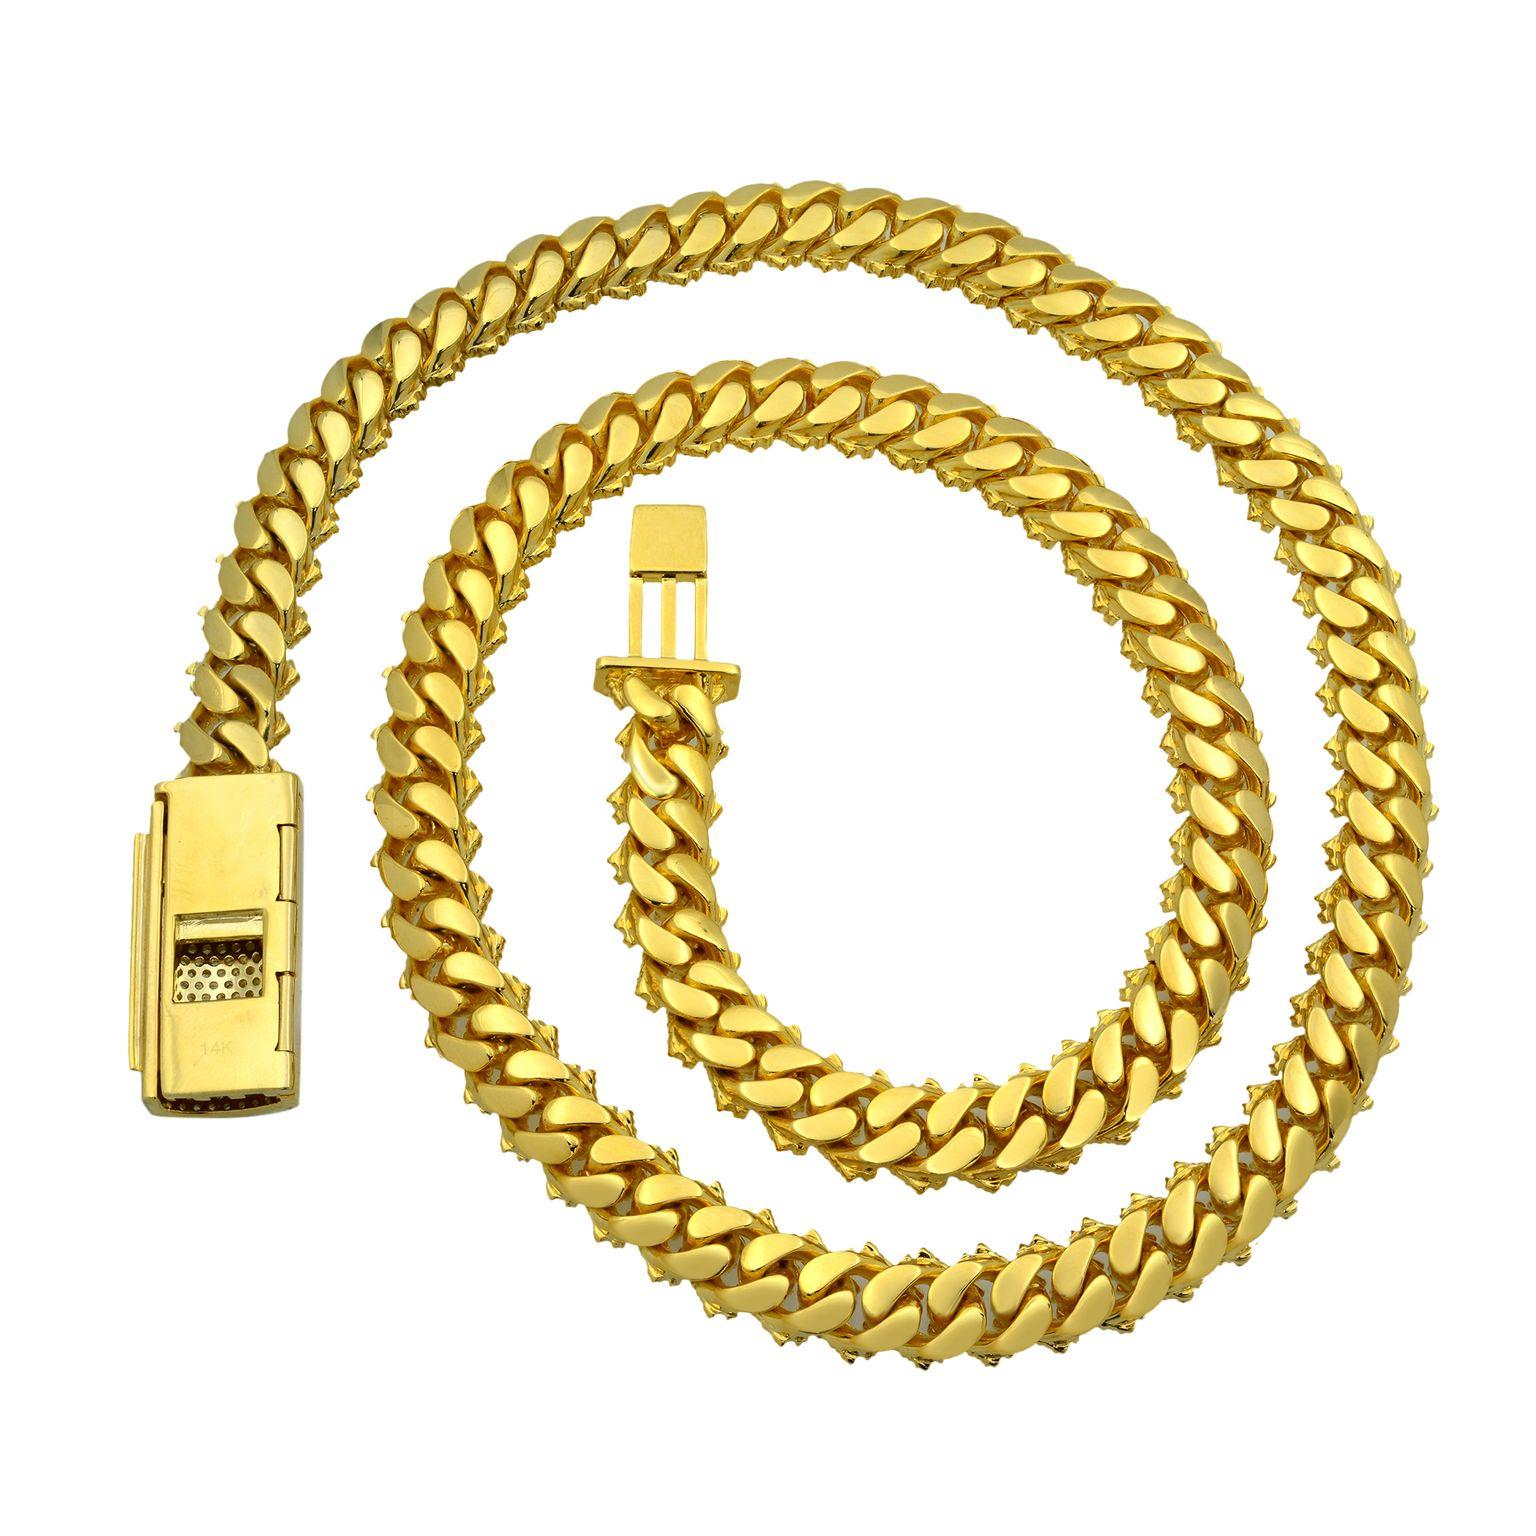 Unisex Diamond Cuban Link Chain necklace in 14K yellow gold. This chain is fully pave set with VS clarity and G-H color tiny round cut diamonds. Total carat weight 15.66. 100% Real gold and diamonds. Weight: 165g. Length: 22.5 inches. Width: